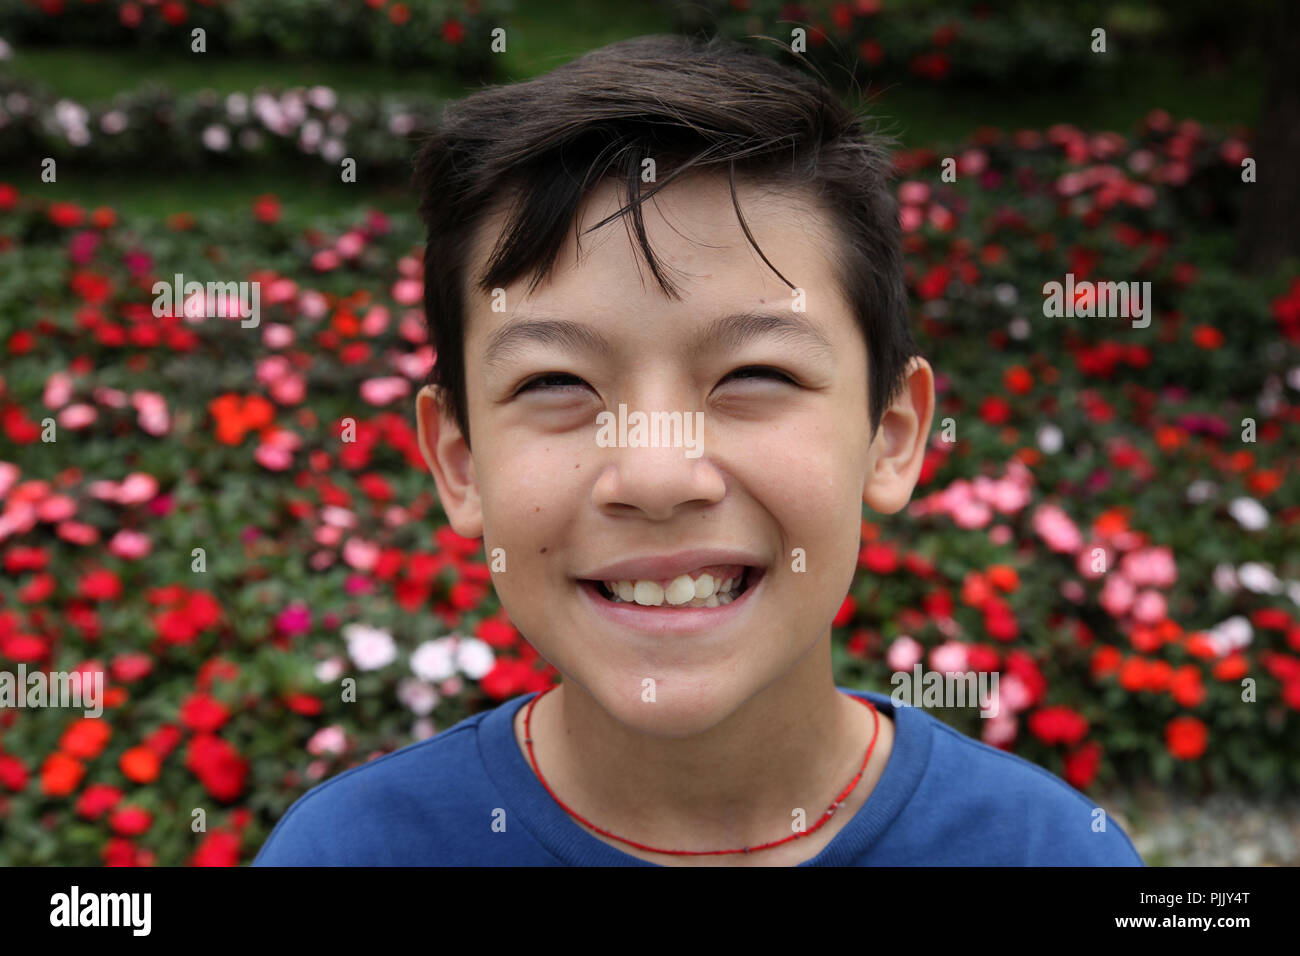 12 years old boy portrait smiling to camera Stock Photo